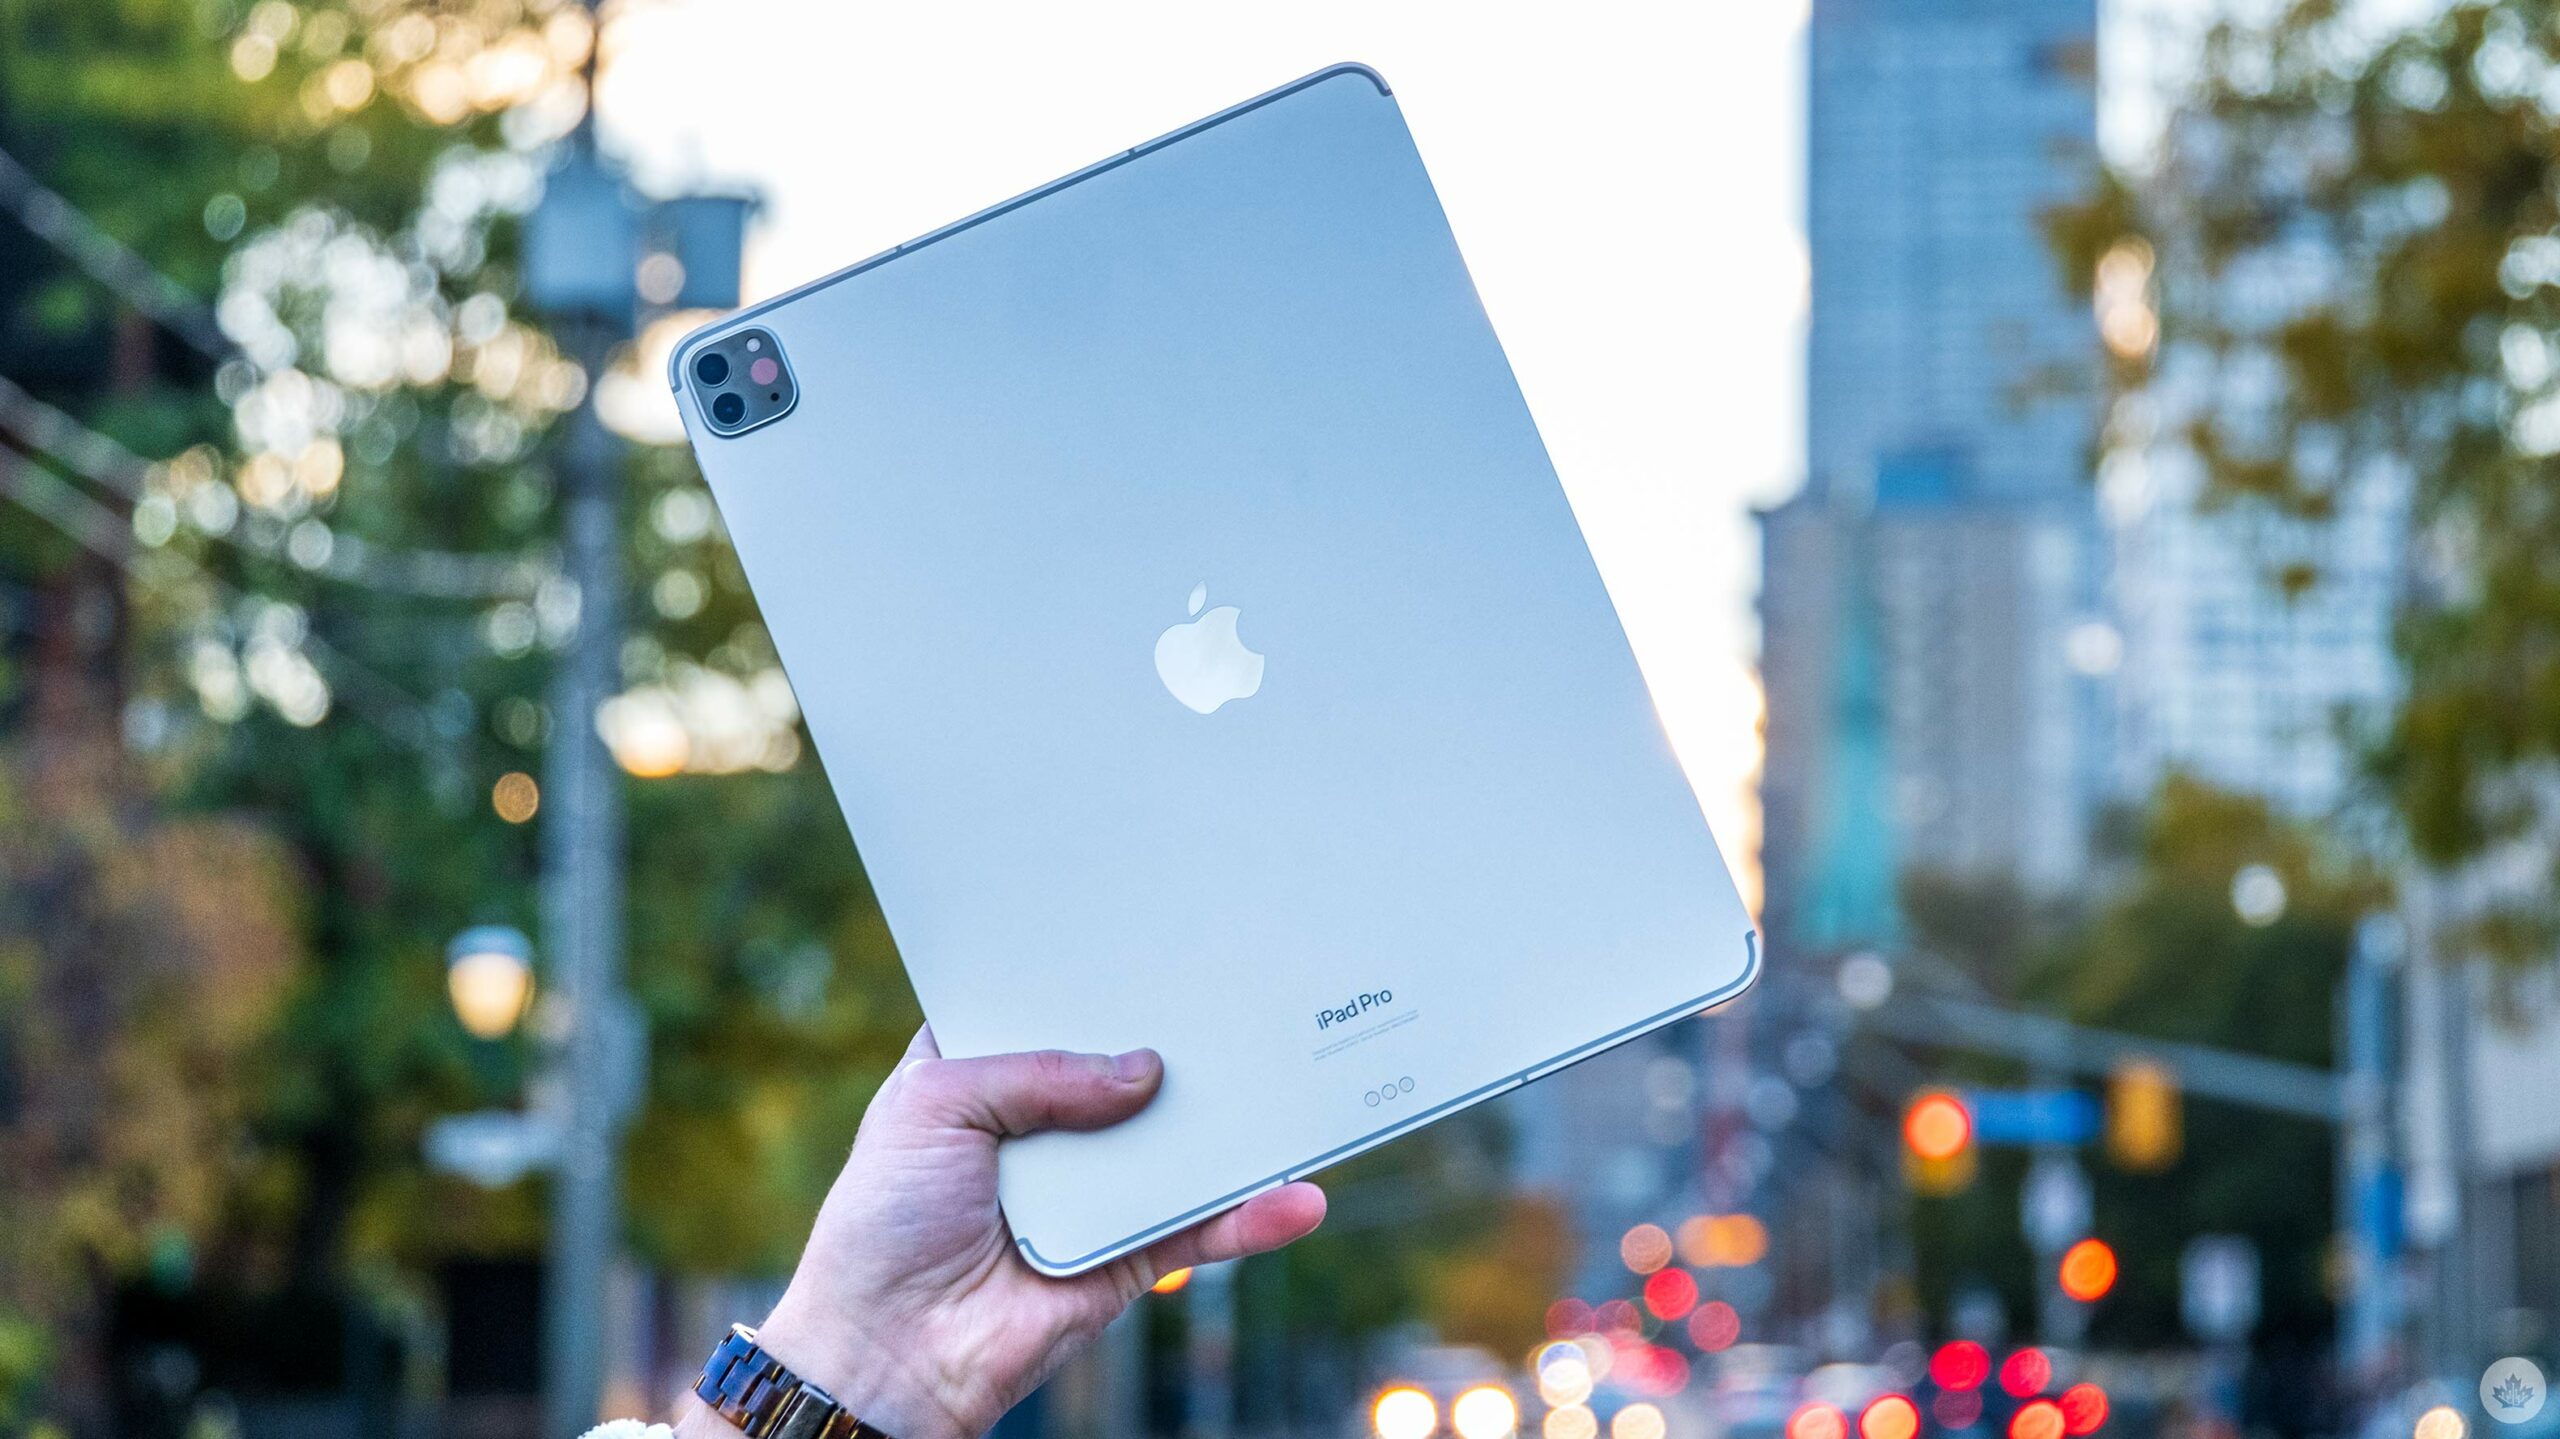 M3-powered iPad Pro, iPad Air and MacBook Air reportedly coming in March